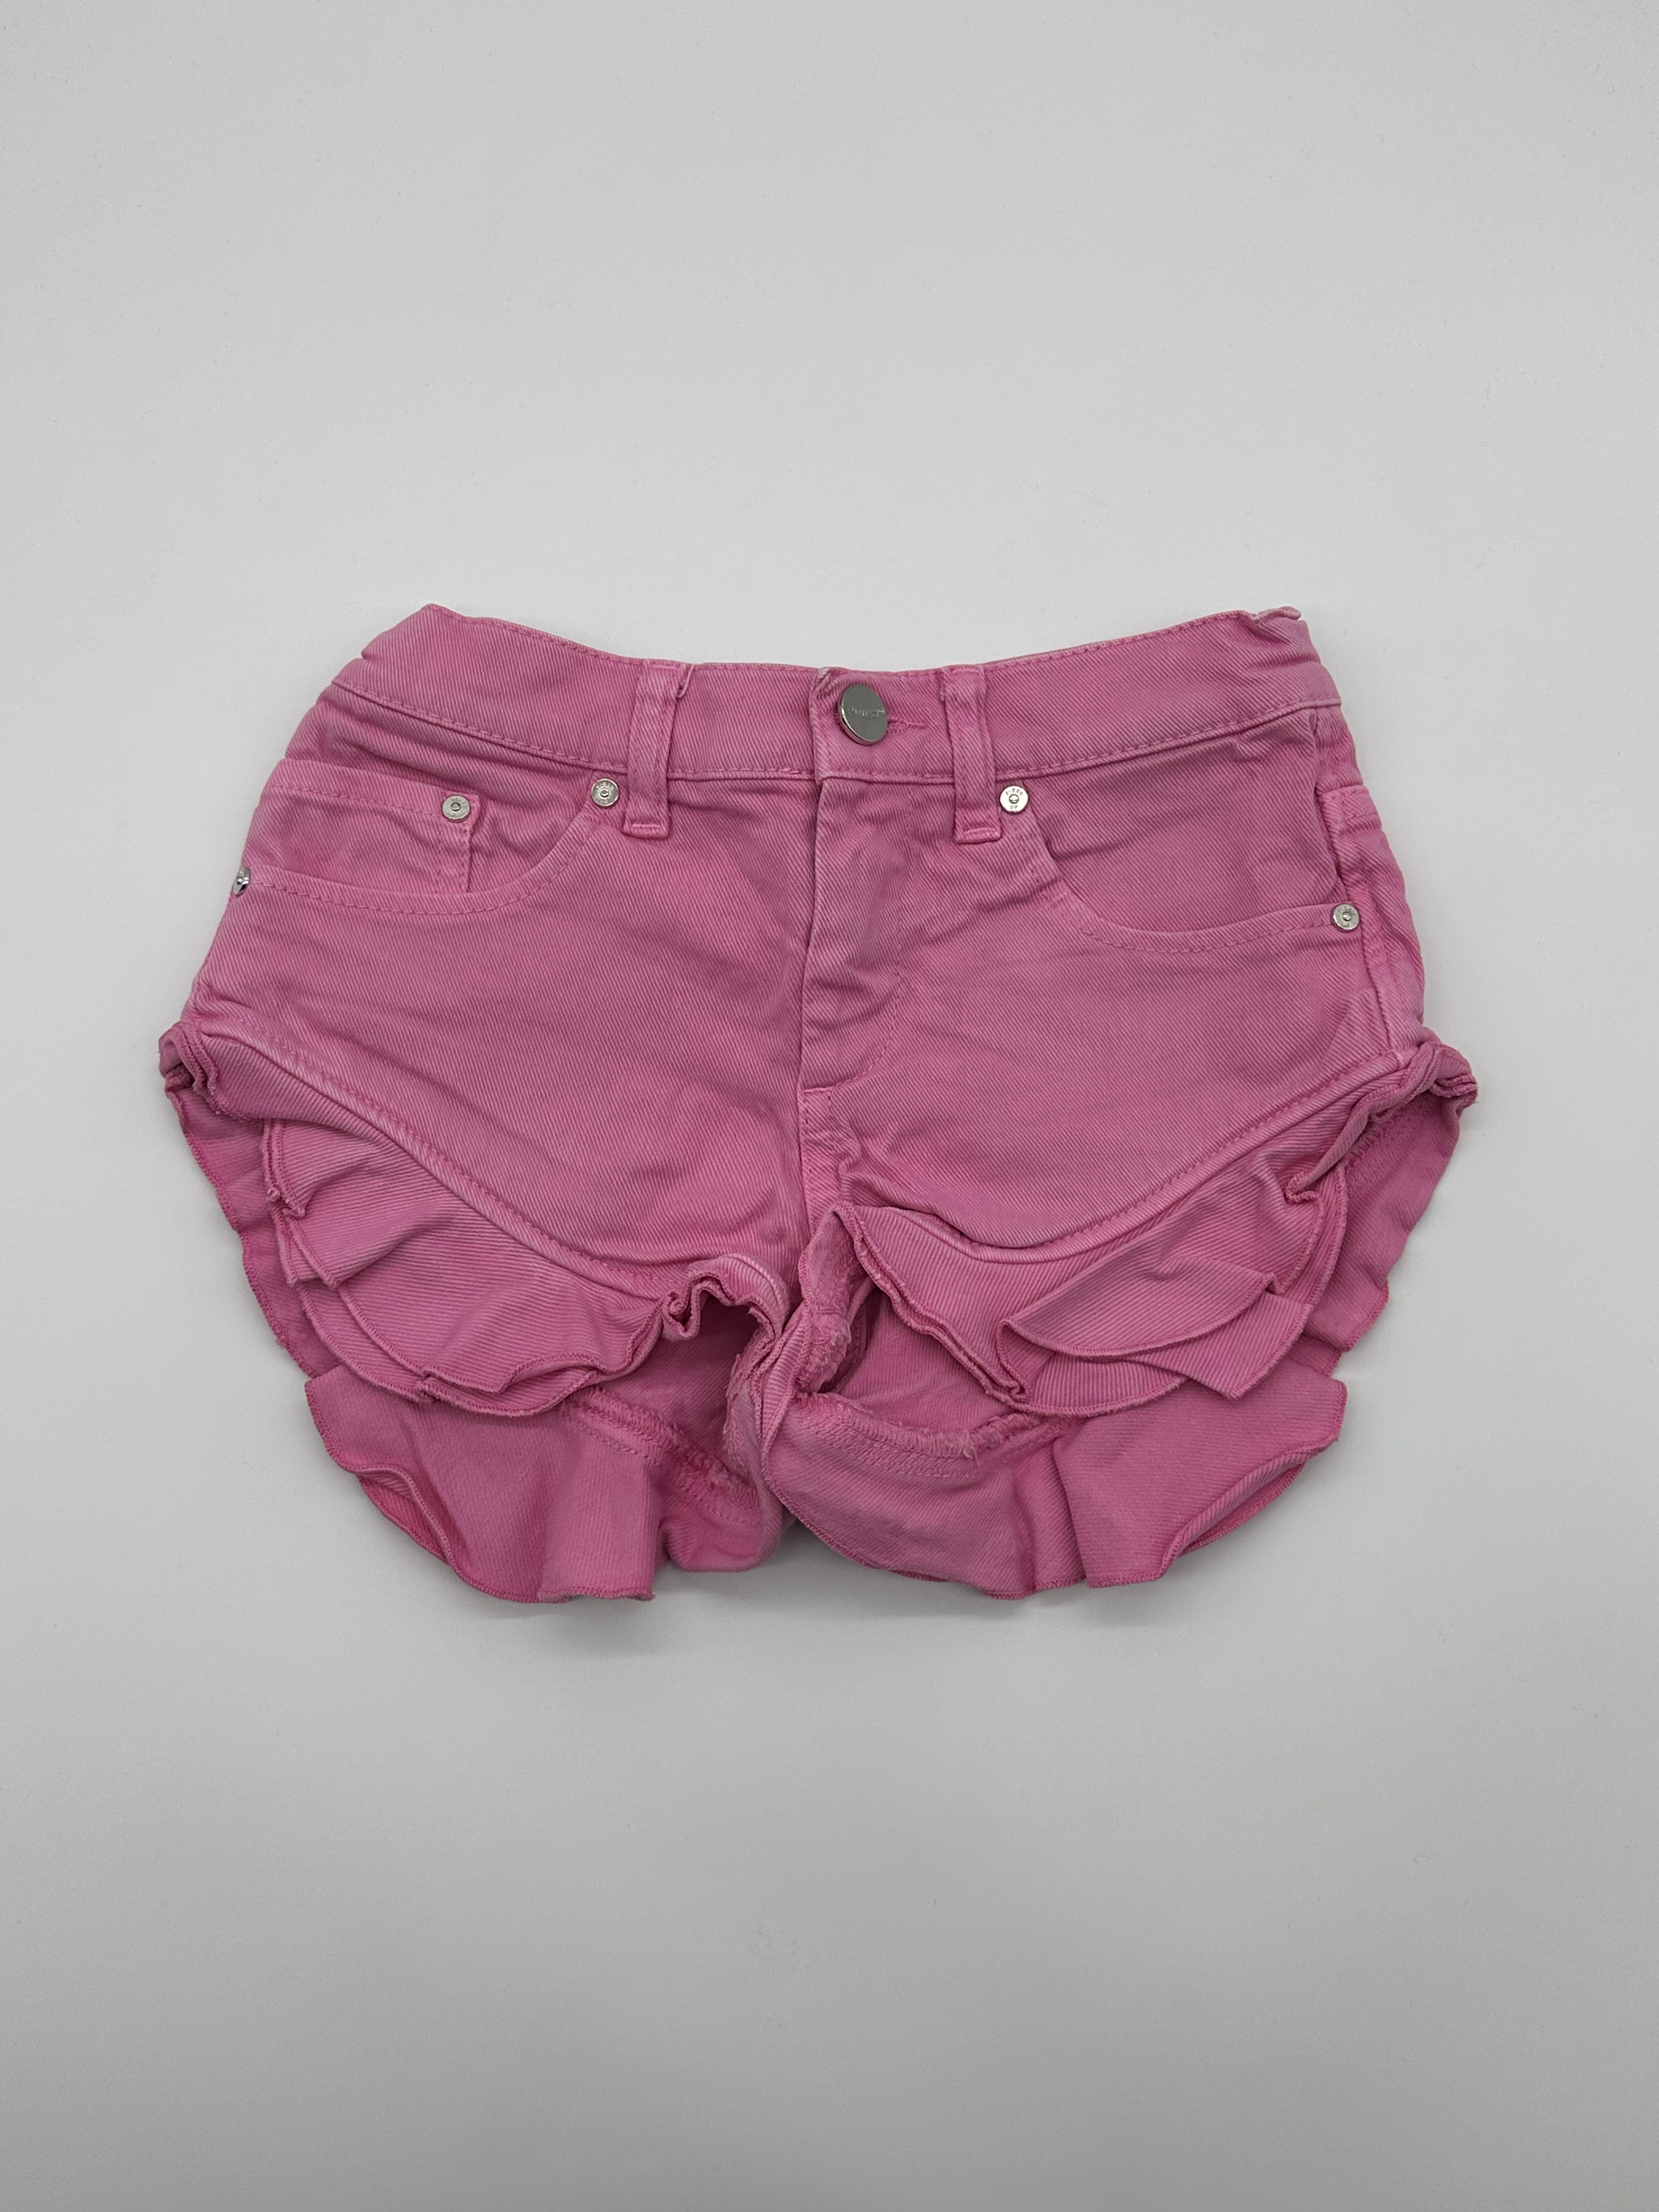 Pink Jeans Shorts